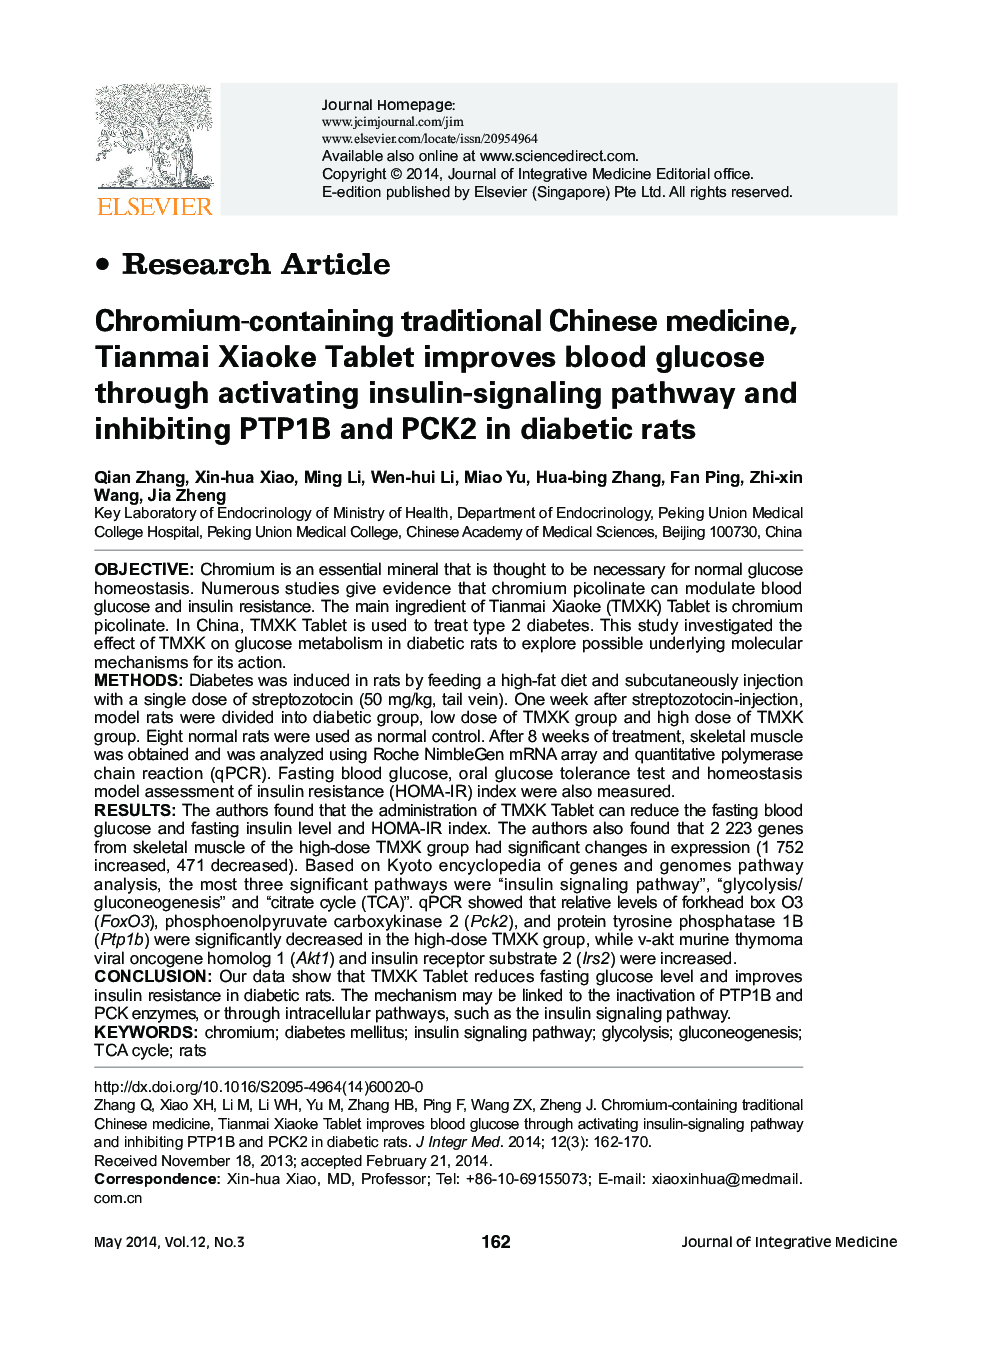 Chromium-containing traditional Chinese medicine, Tianmai Xiaoke Tablet improves blood glucose through activating insulin-signaling pathway and inhibiting PTP1B and PCK2 in diabetic rats